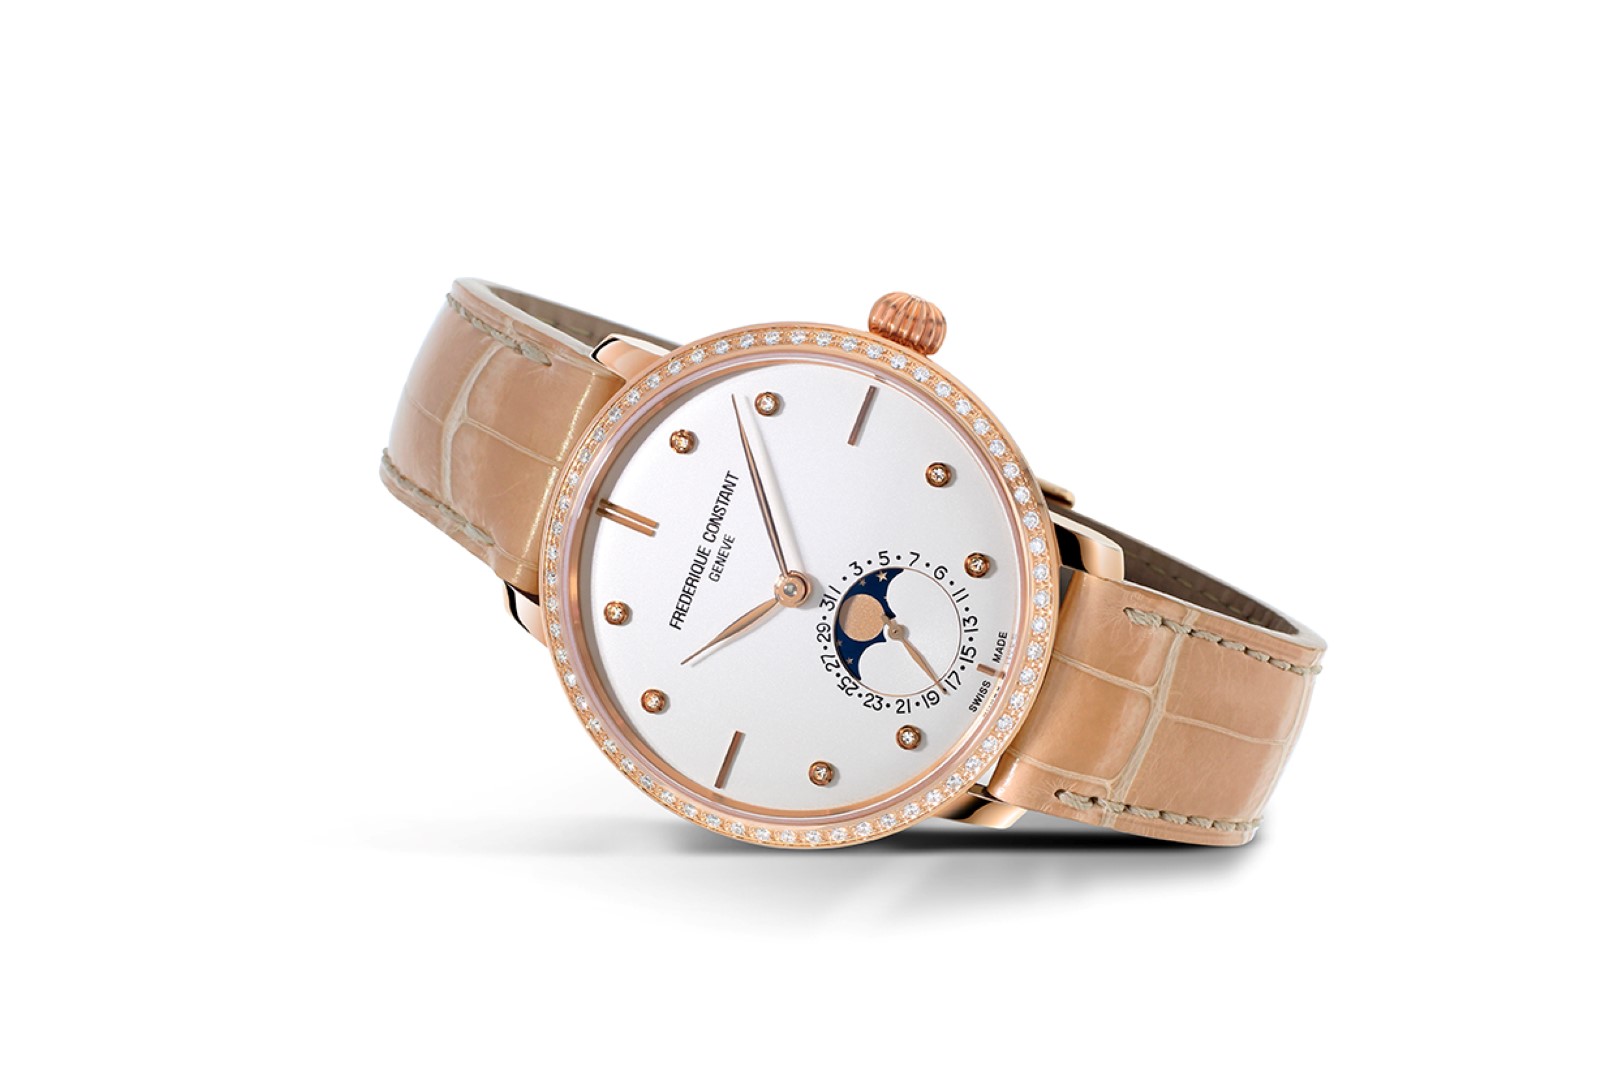 Slimline Moonphase Manufacture For Women perfil